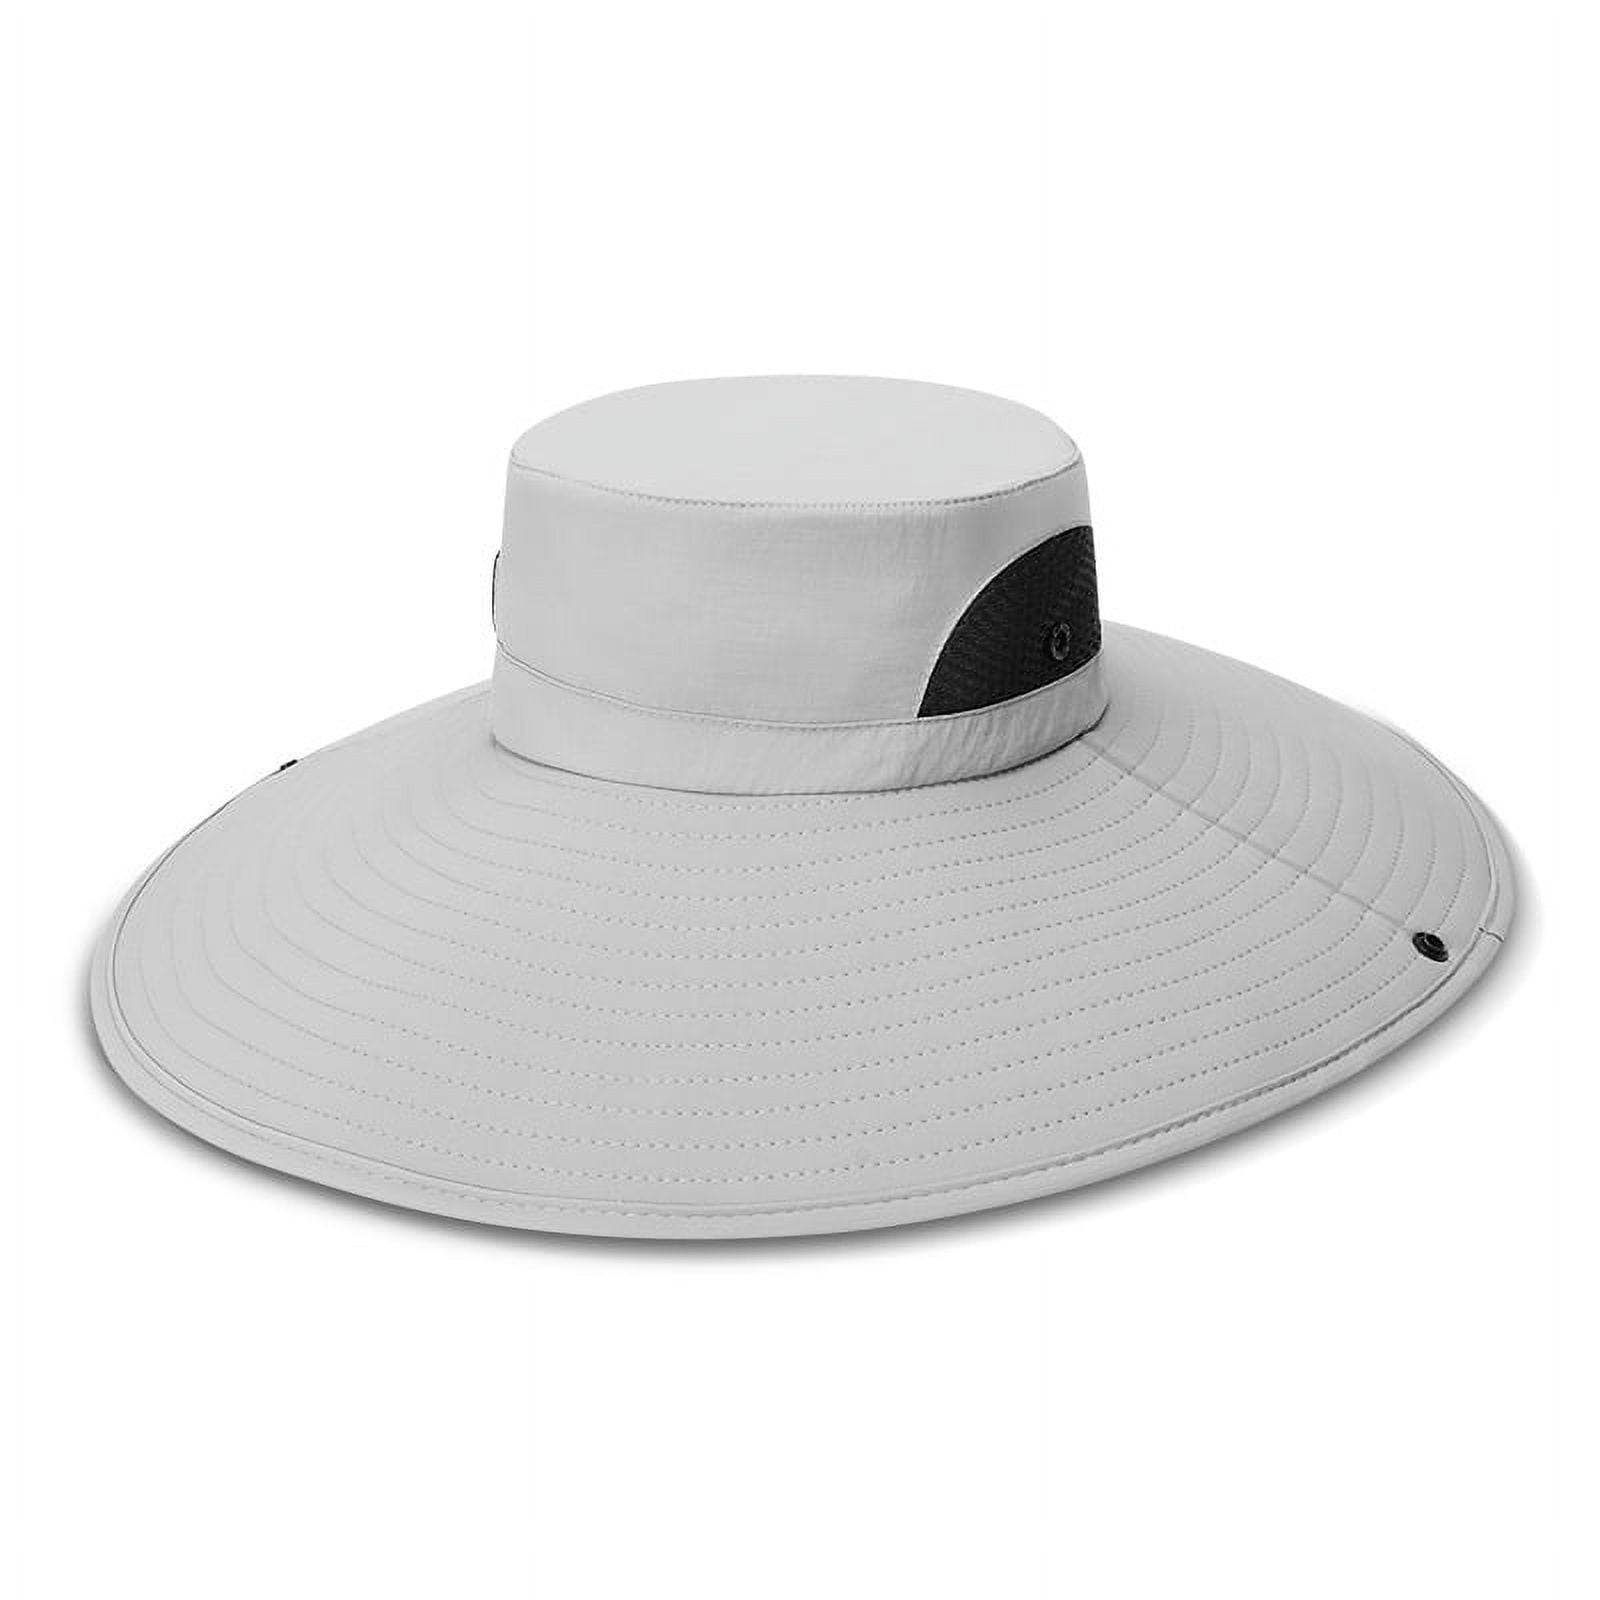 Sun Hat Fishing Hat for Men Beach Hat Super Wide Brim for Men and